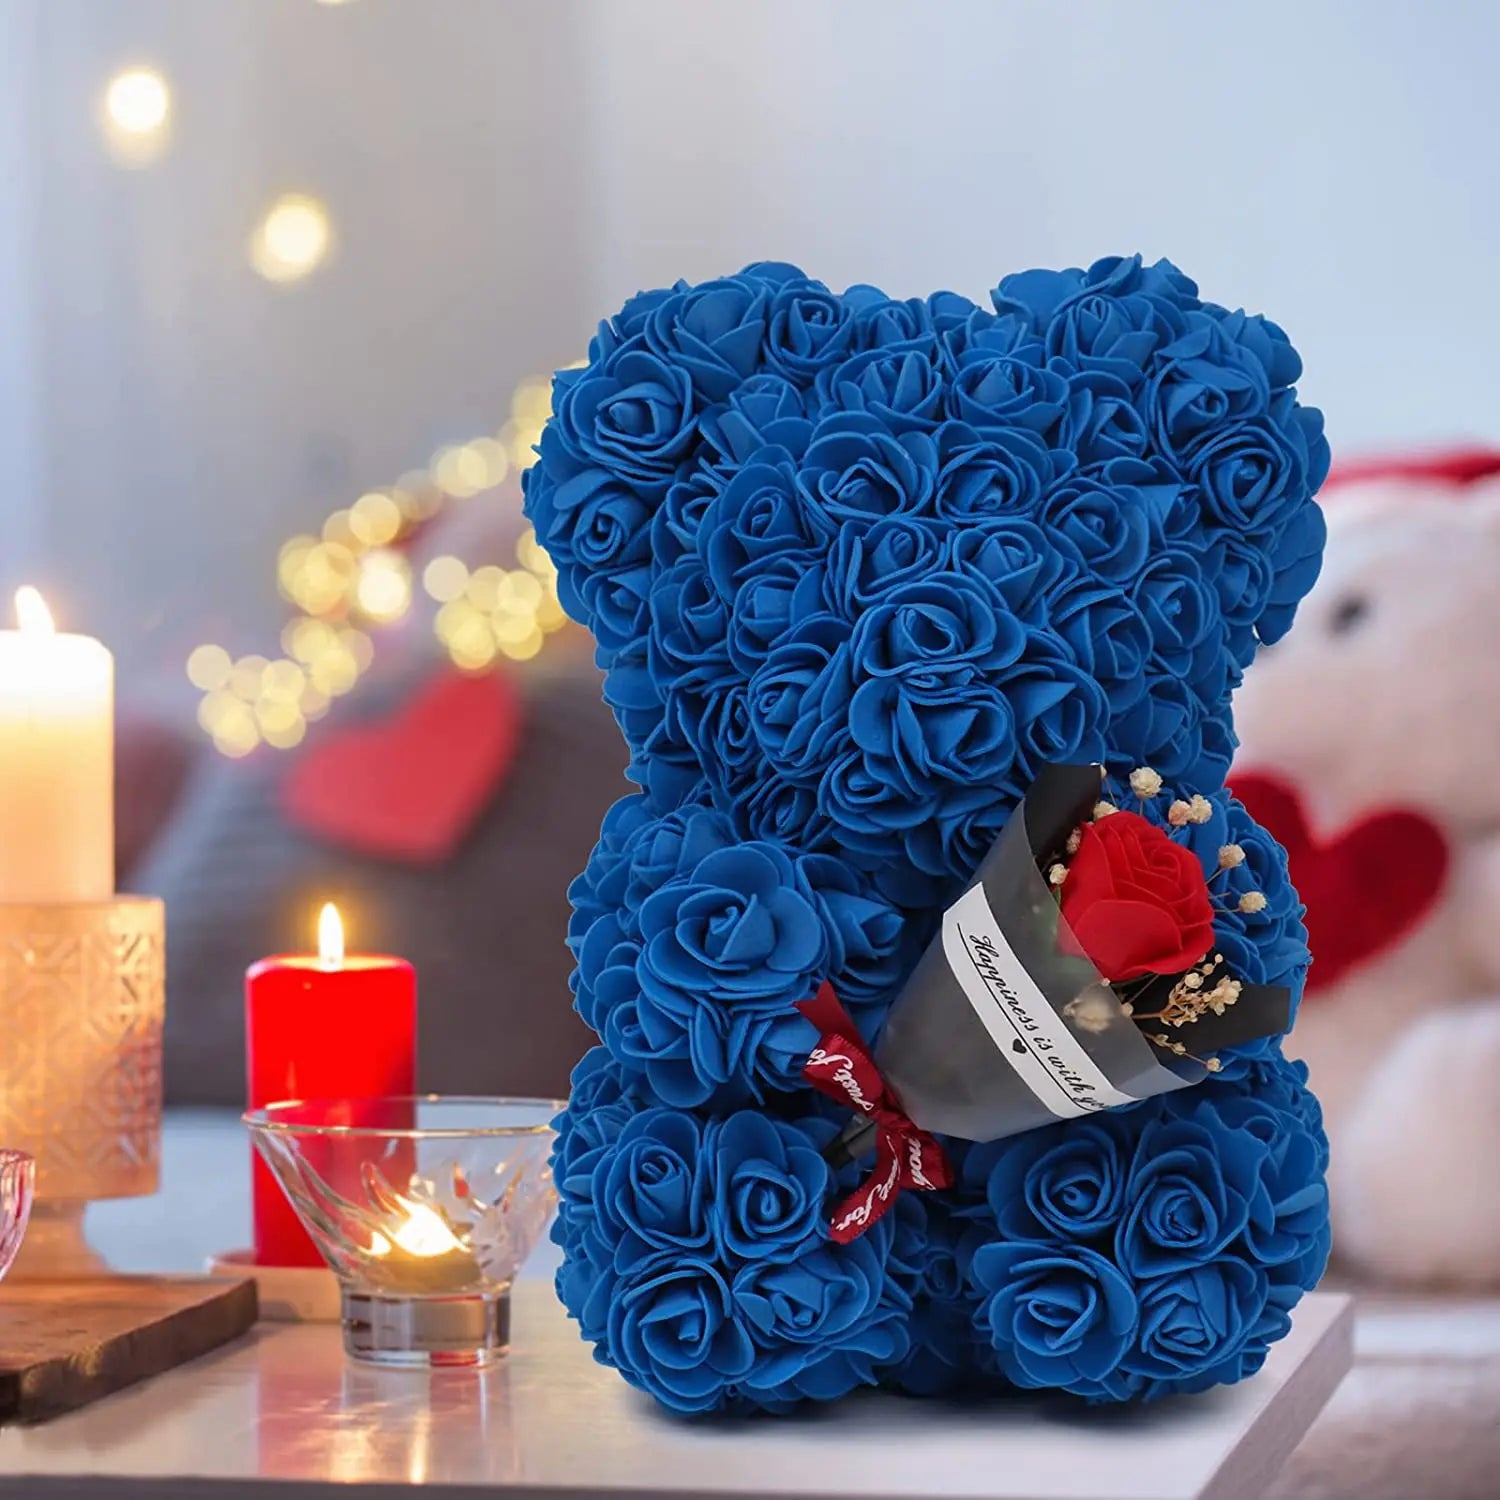 Valentine's Day Gift Boxes Artificial Christmas Ladies Rose Bath Flower Red Teddy Plush Bear: Plush Bear